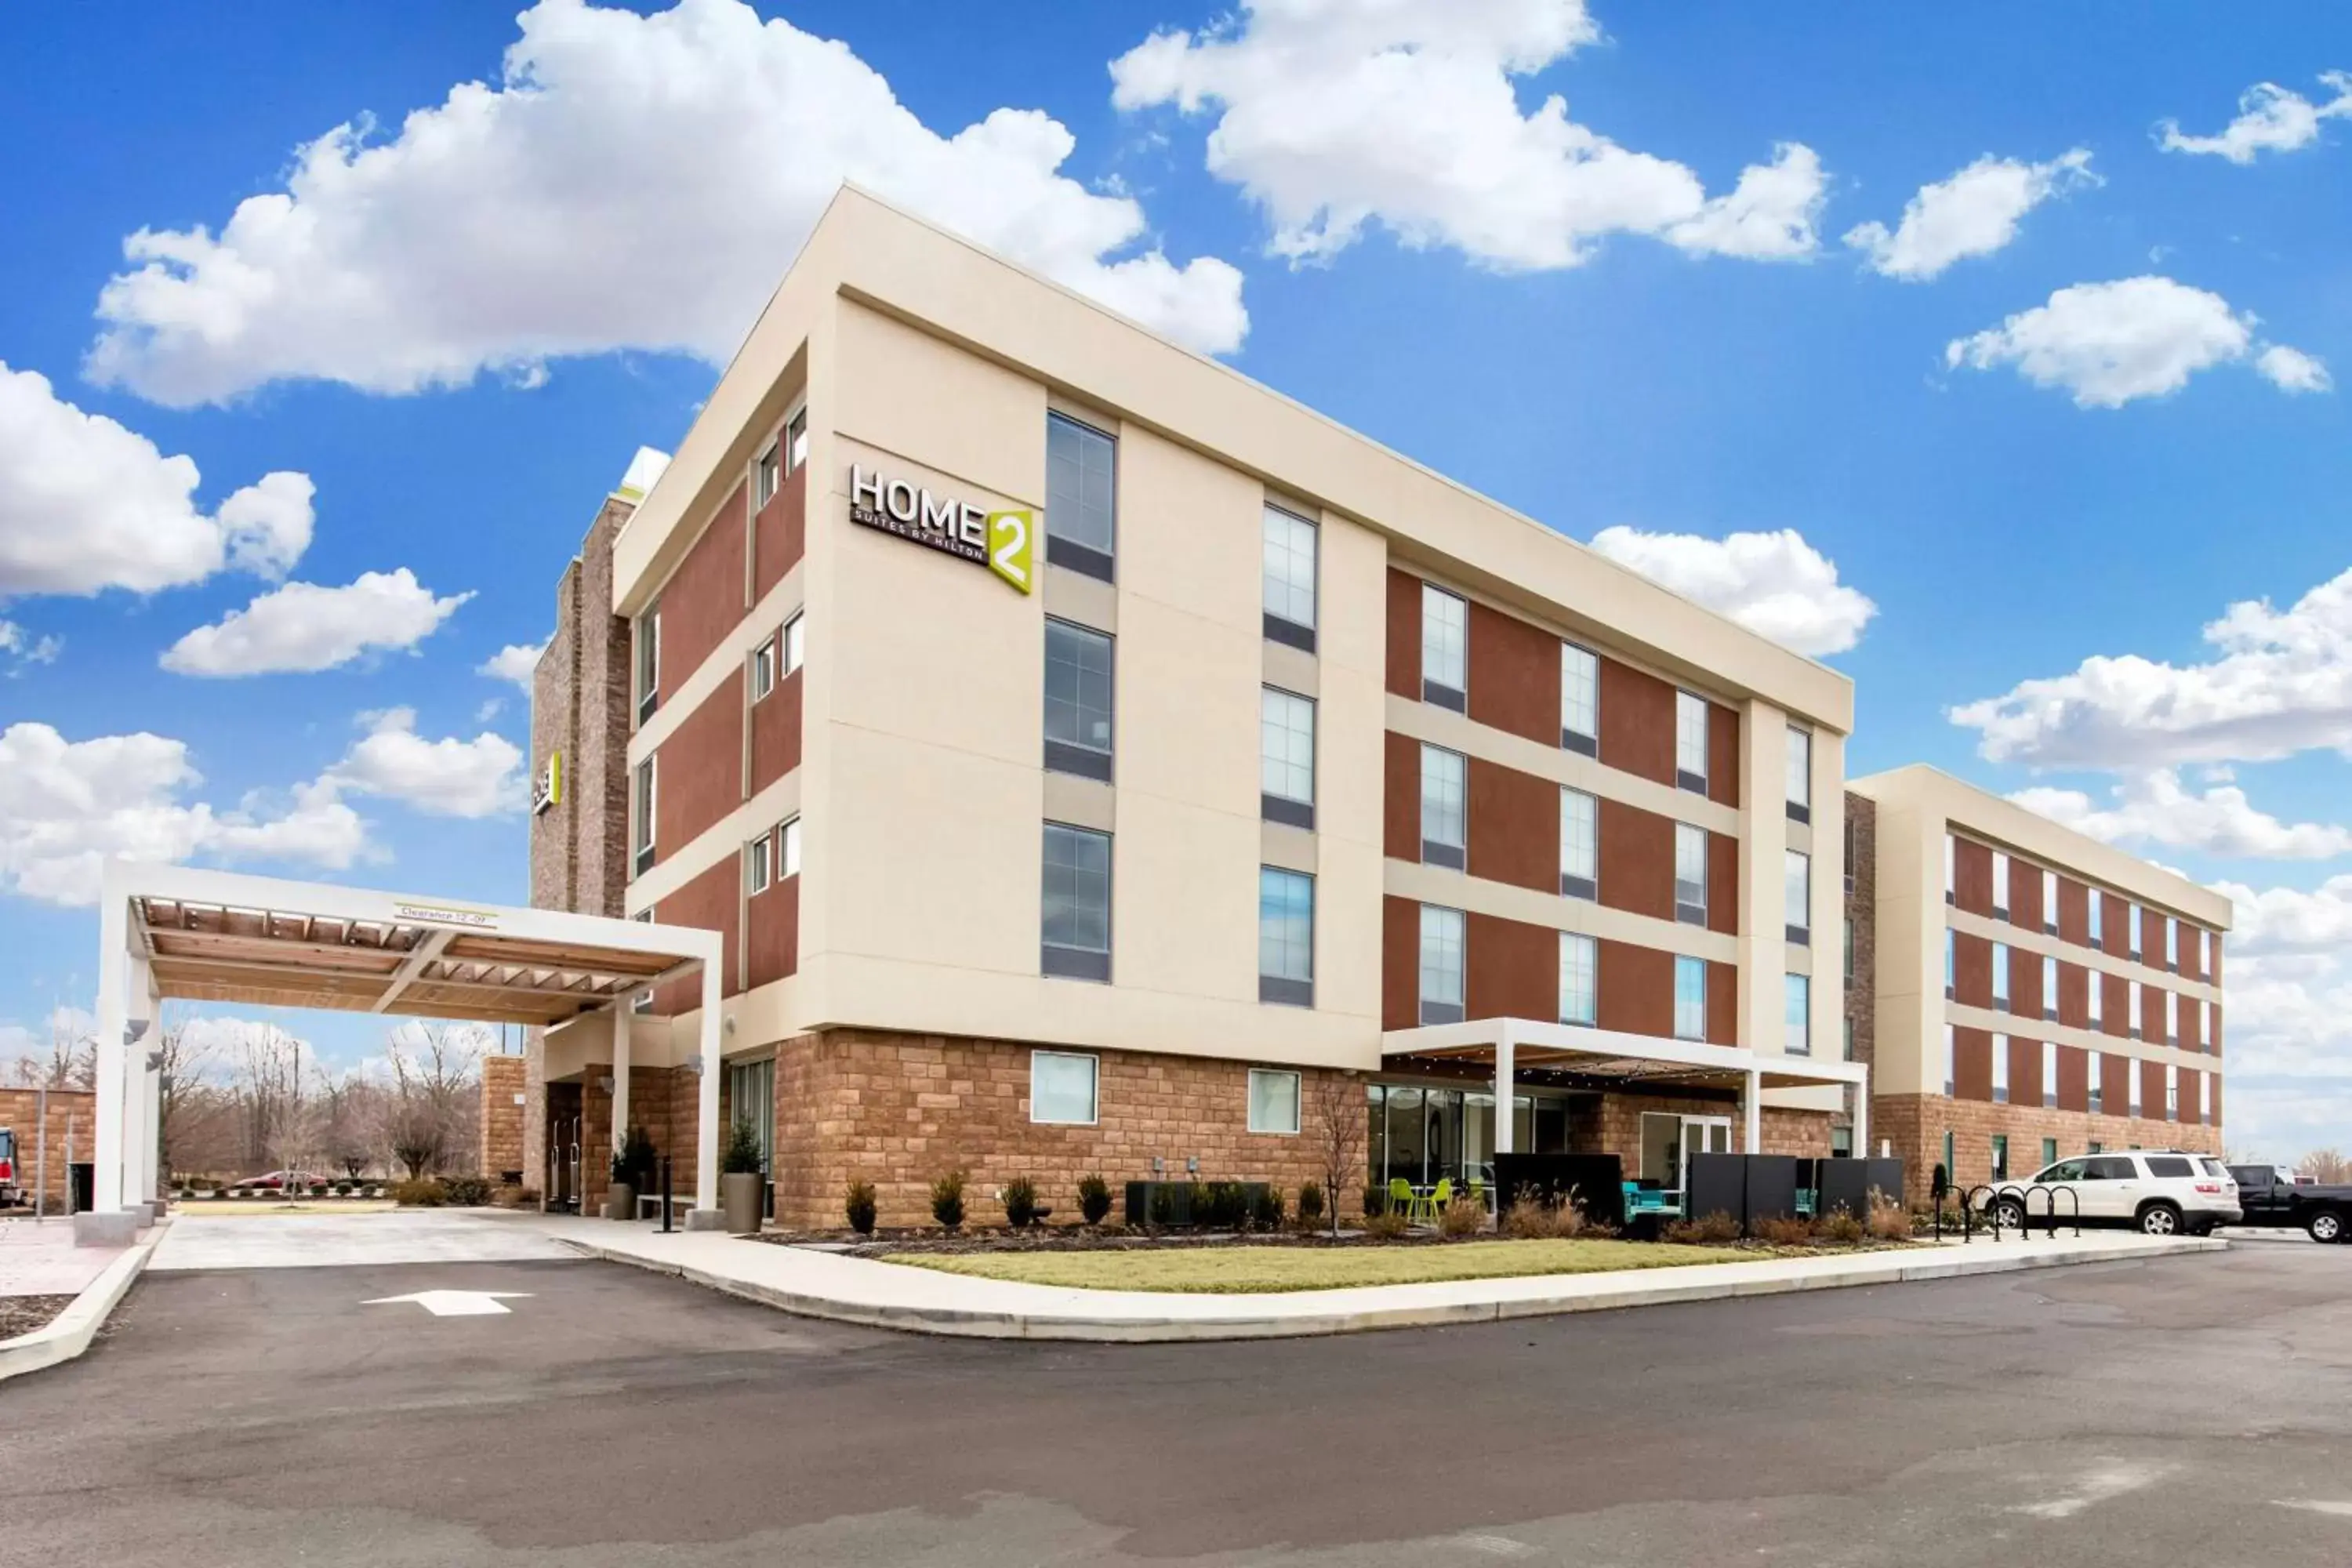 Property Building in Home2 Suites By Hilton Olive Branch